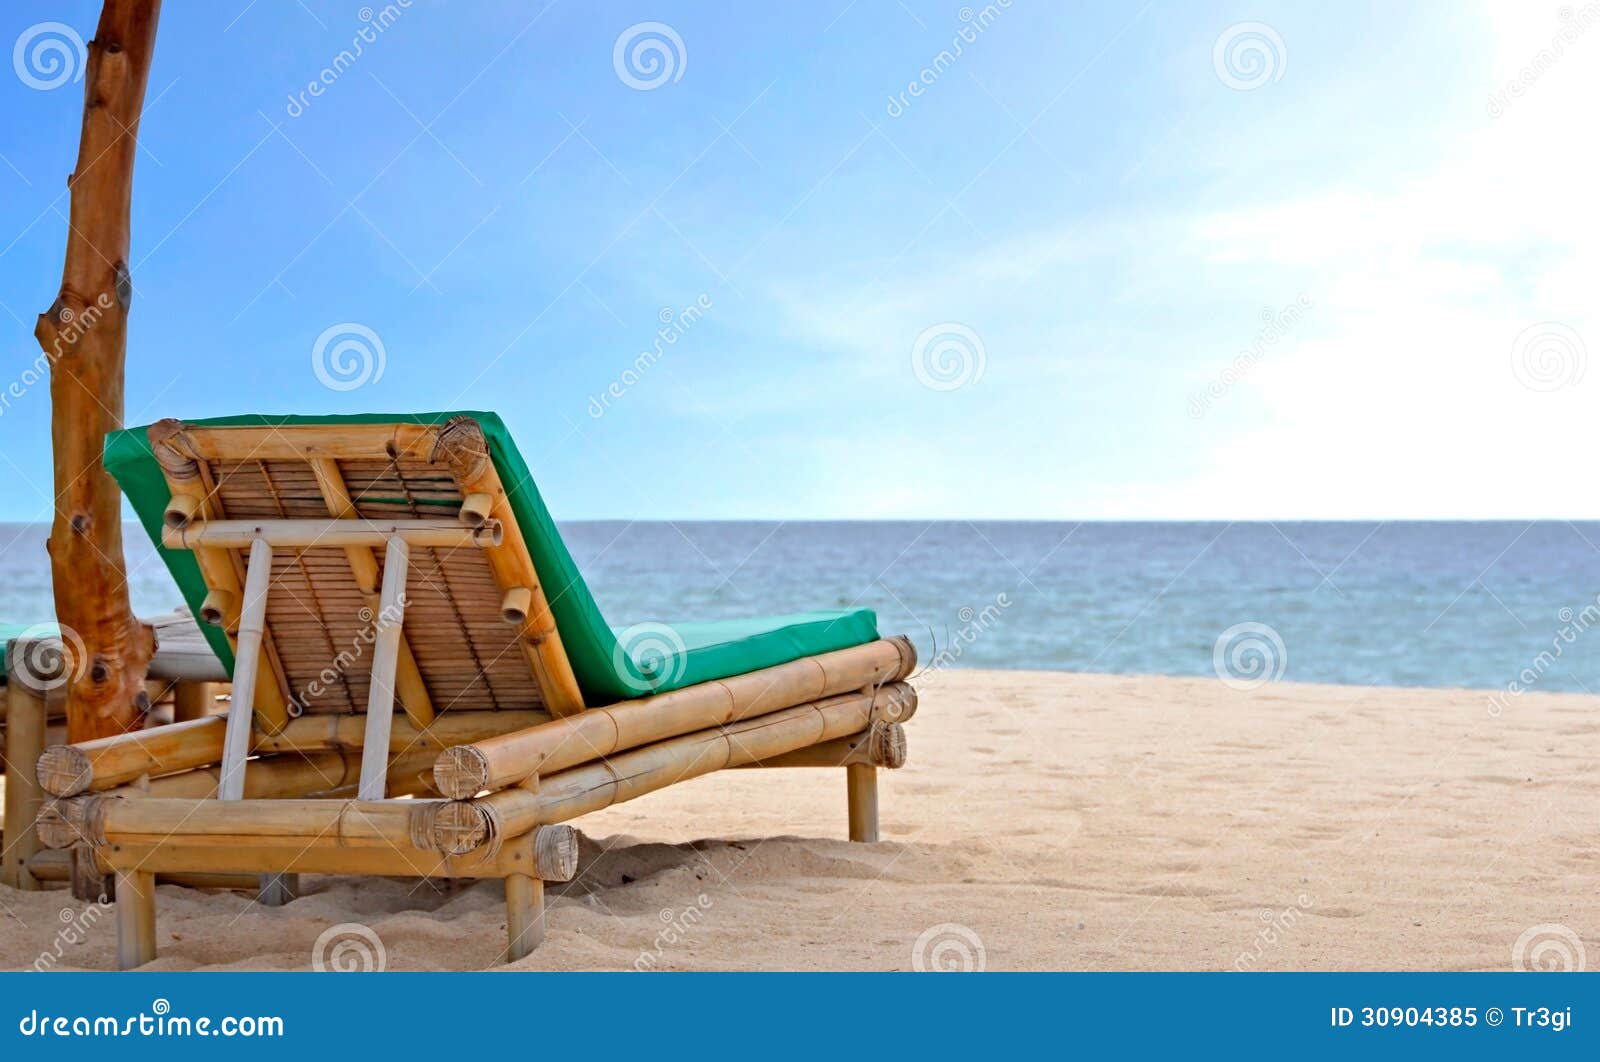 Relaxing Chair On White Sandy Beach Royalty Free Stock